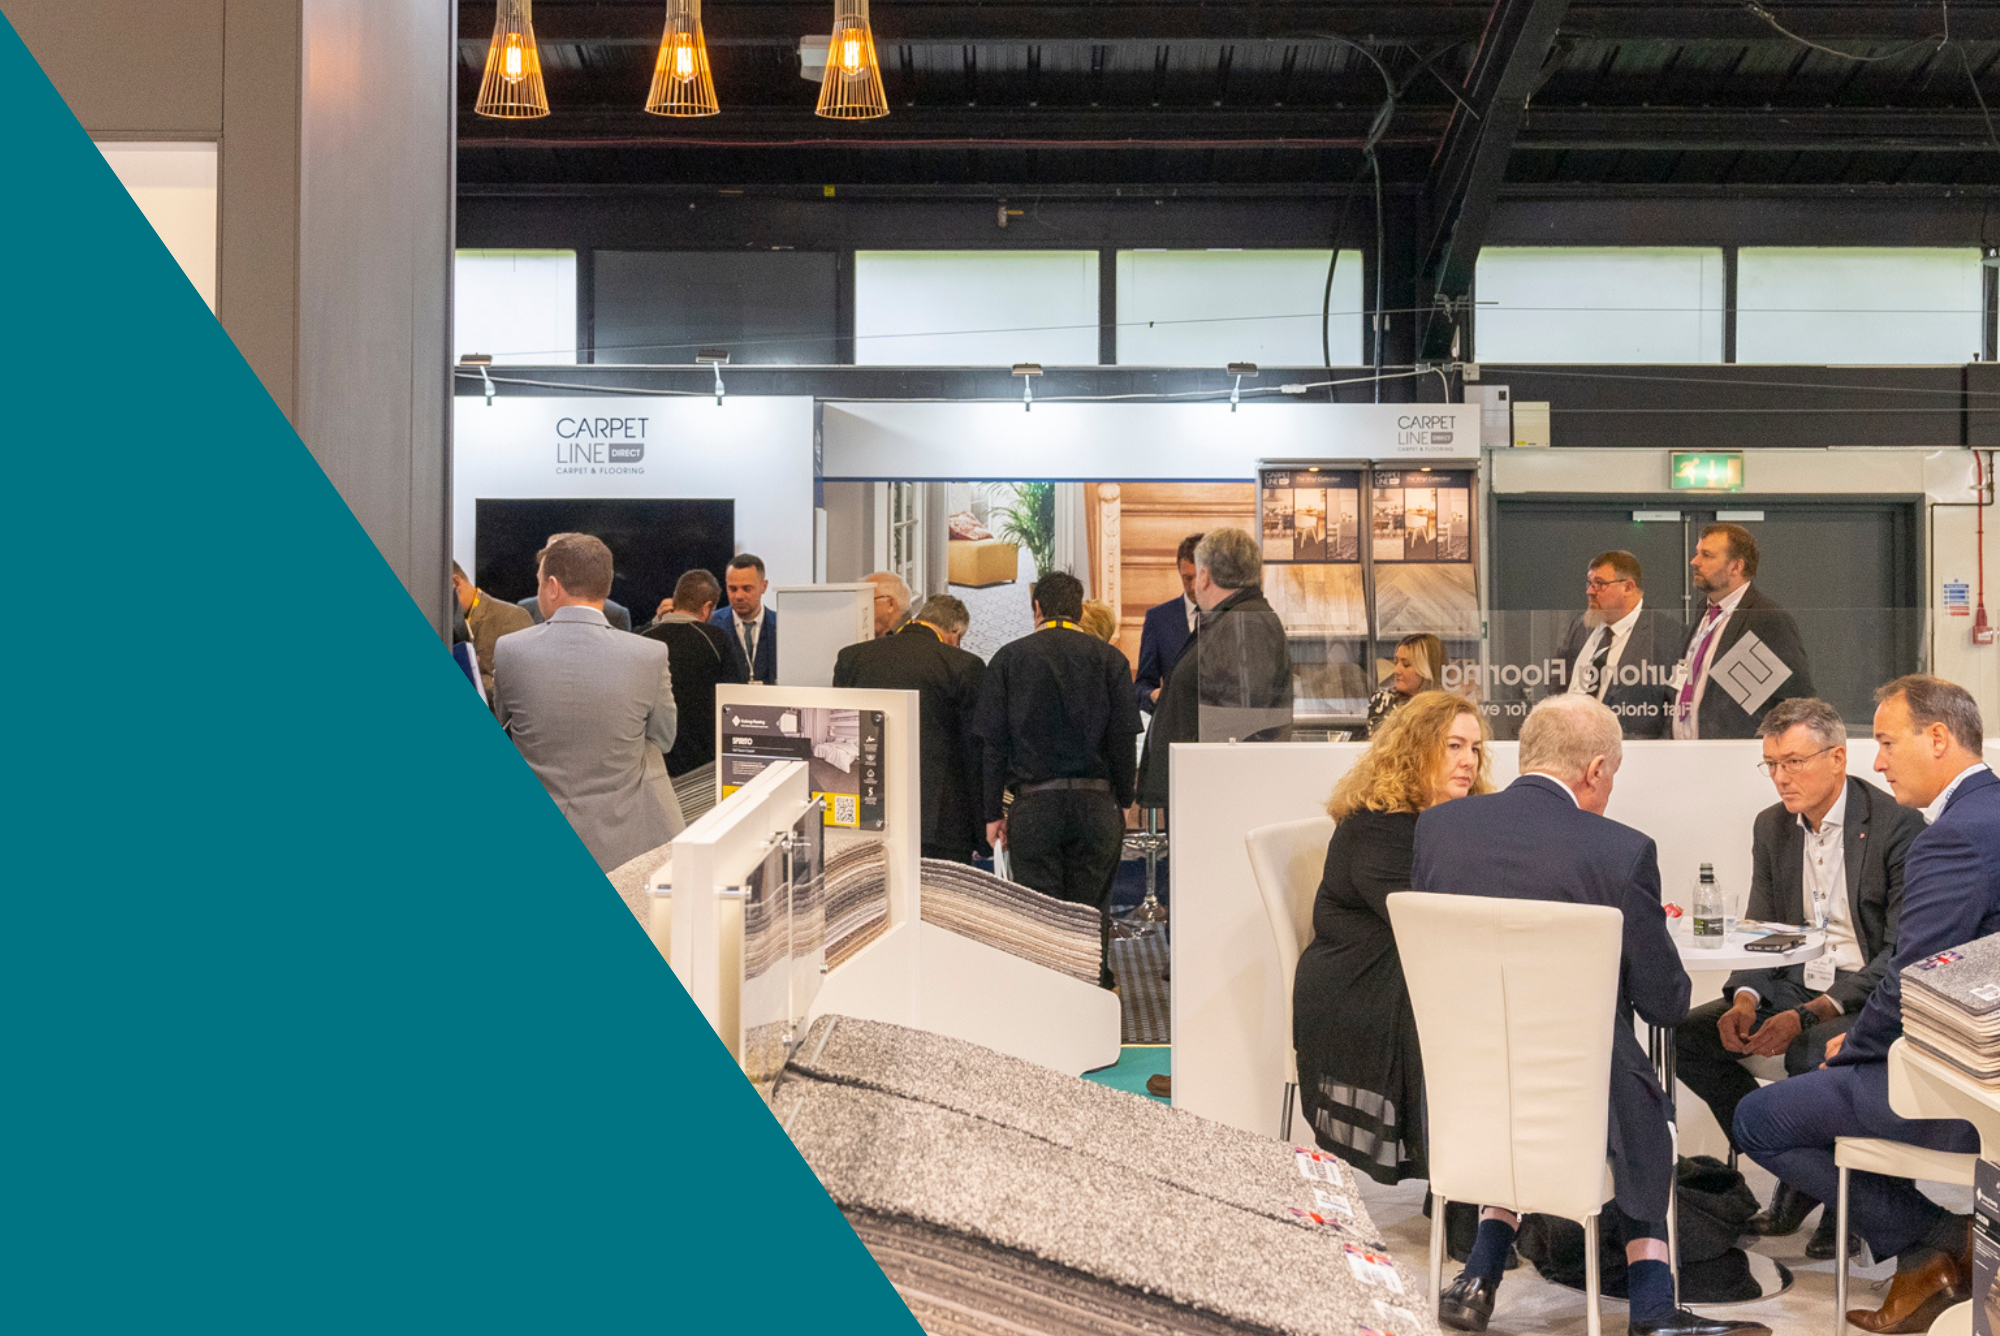 FOR OVER 60 YEARS, THOUSANDS OF RETAILERS, CONTRACTORS, DISTRIBUTORS, FITTERS, DESIGNERS AND DEVELOPERS HAVE ATTENDED THE FLOORING SHOW TO MEET, CONNECT AND DO BUSINESS.